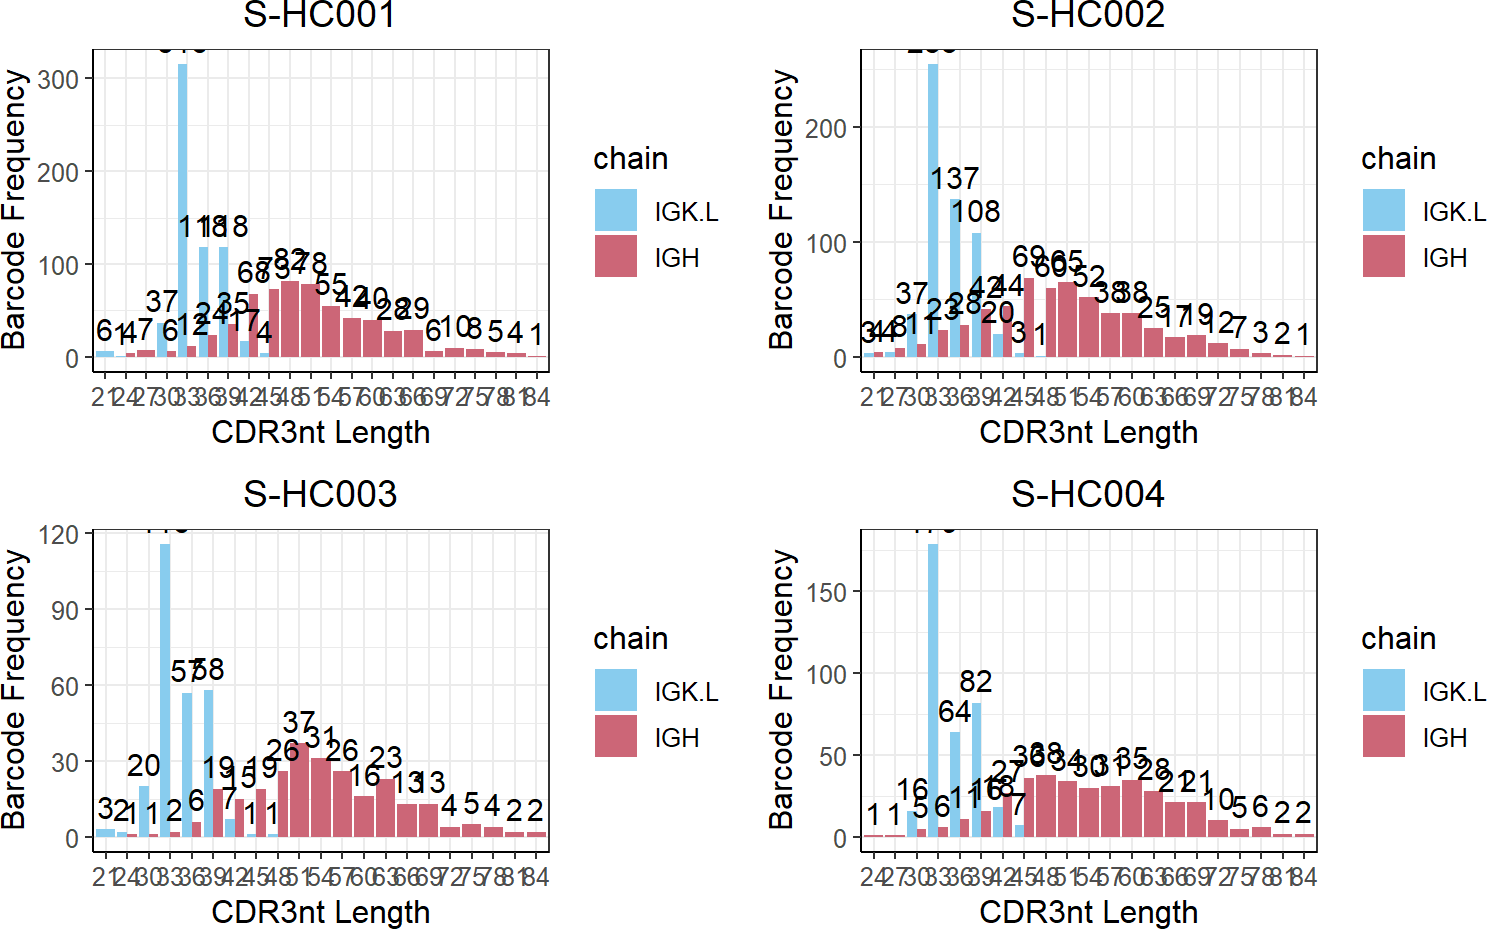 Plots of CDR3 length distribution